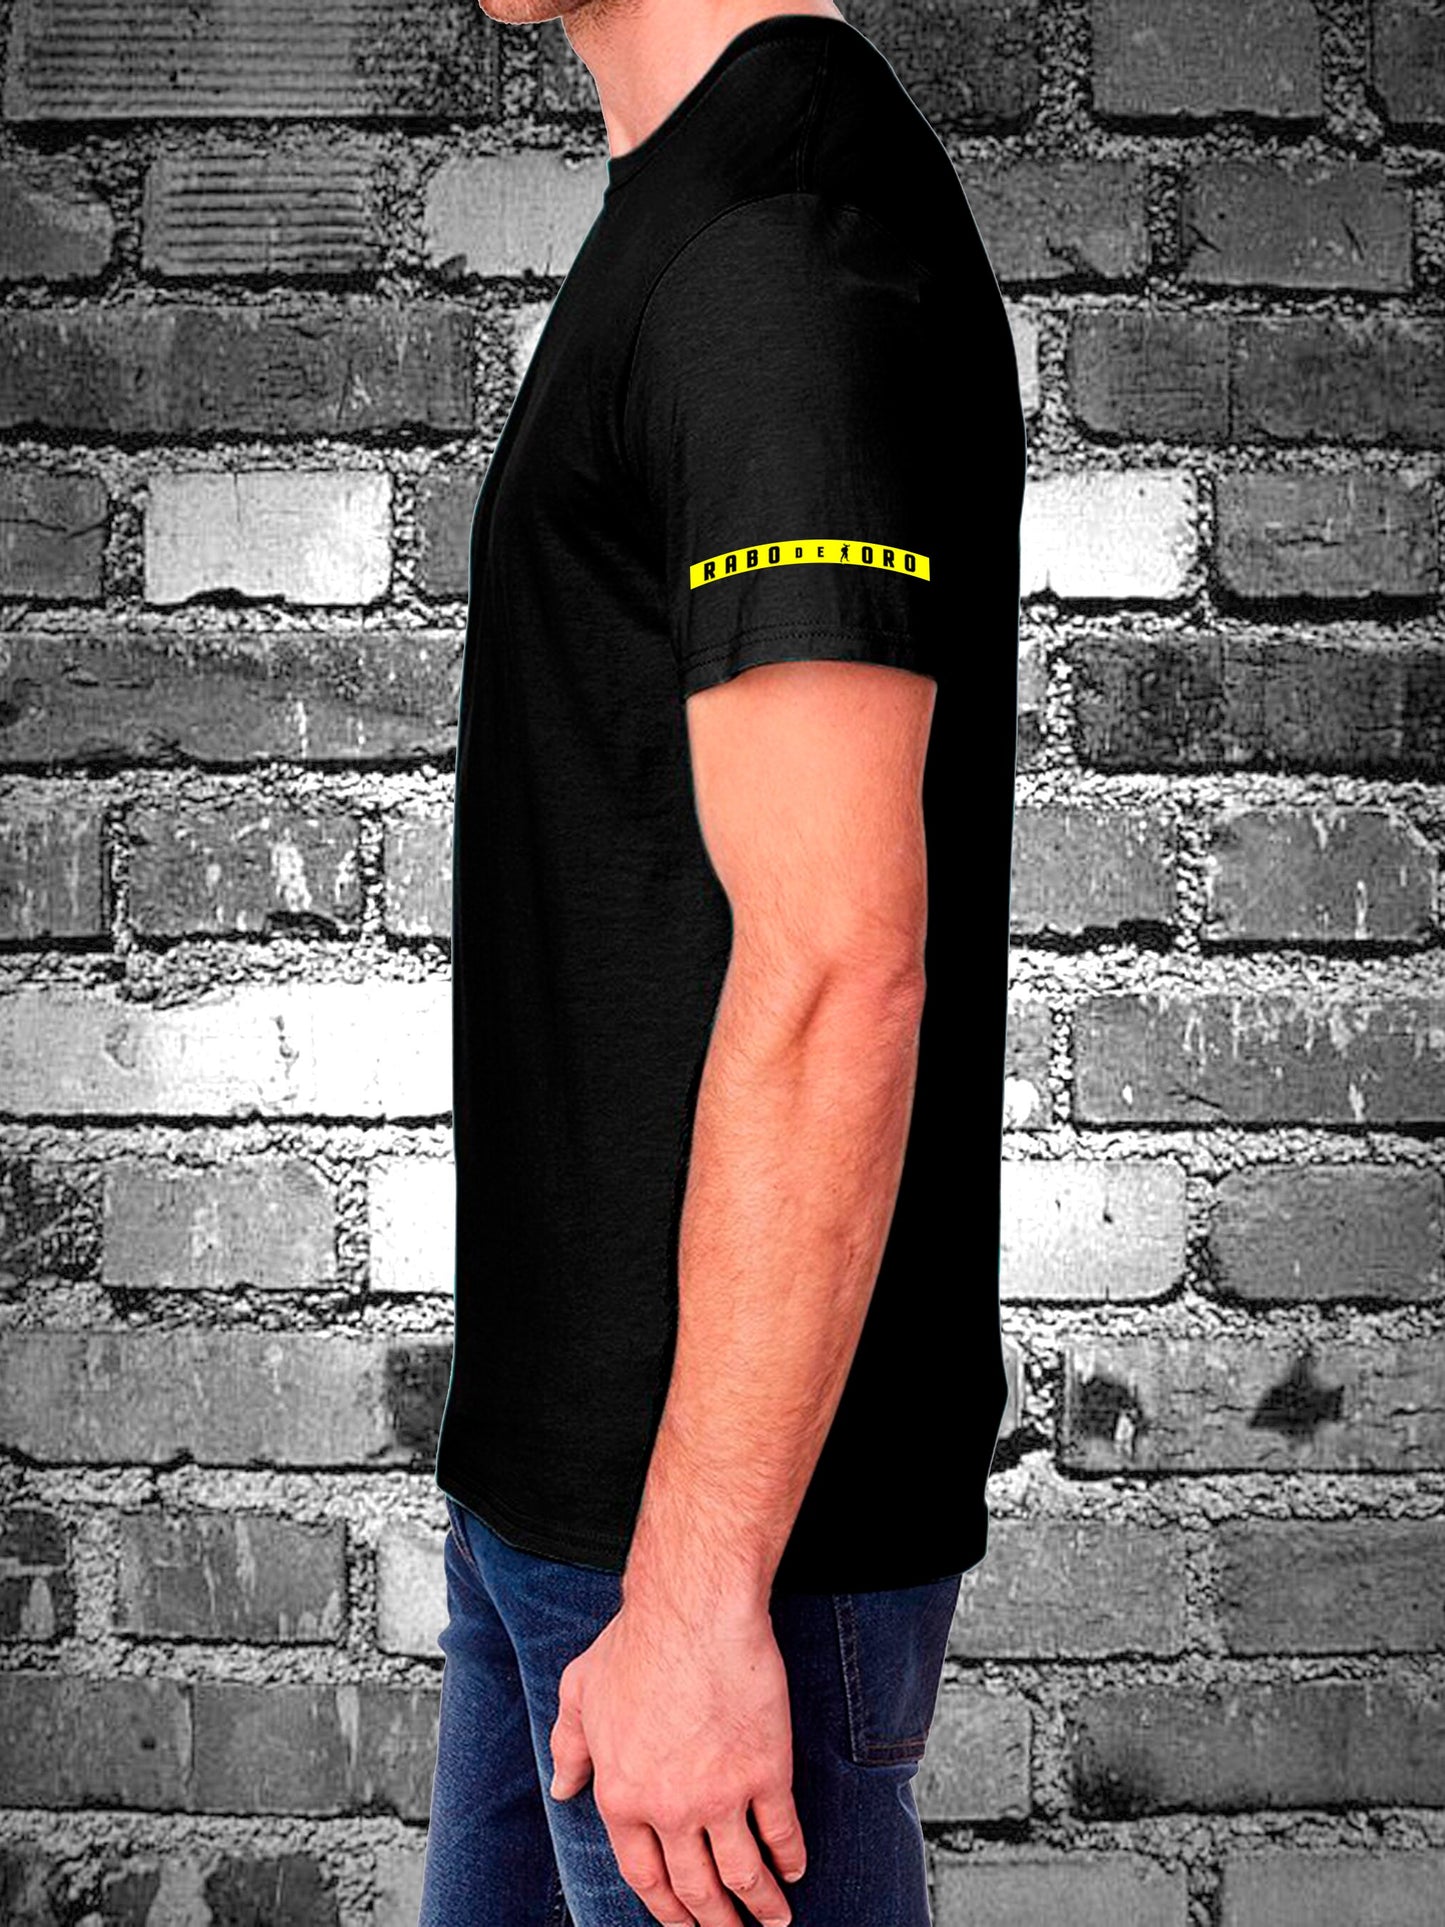 FEETISH Black T-Shirt with BDSM Hanky Code details